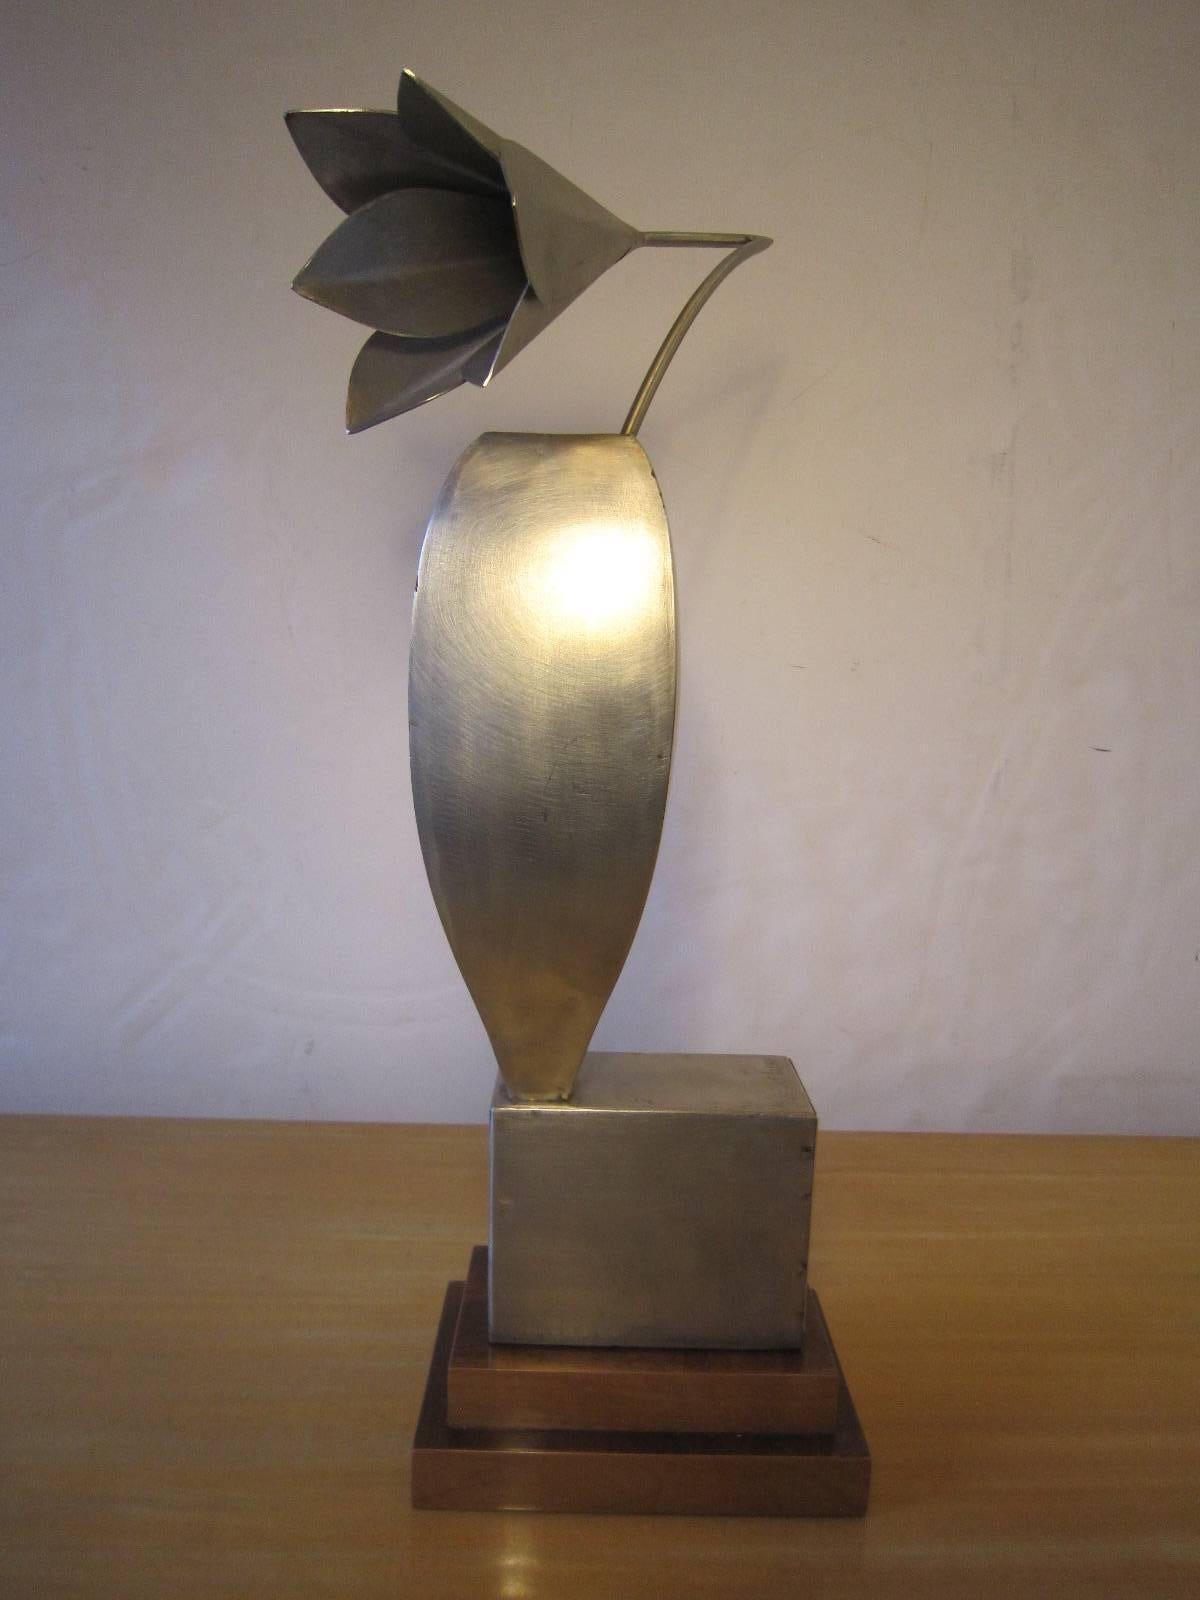 American Abstract Cubist Steel Sculpture Signed Peter Charles, 1988